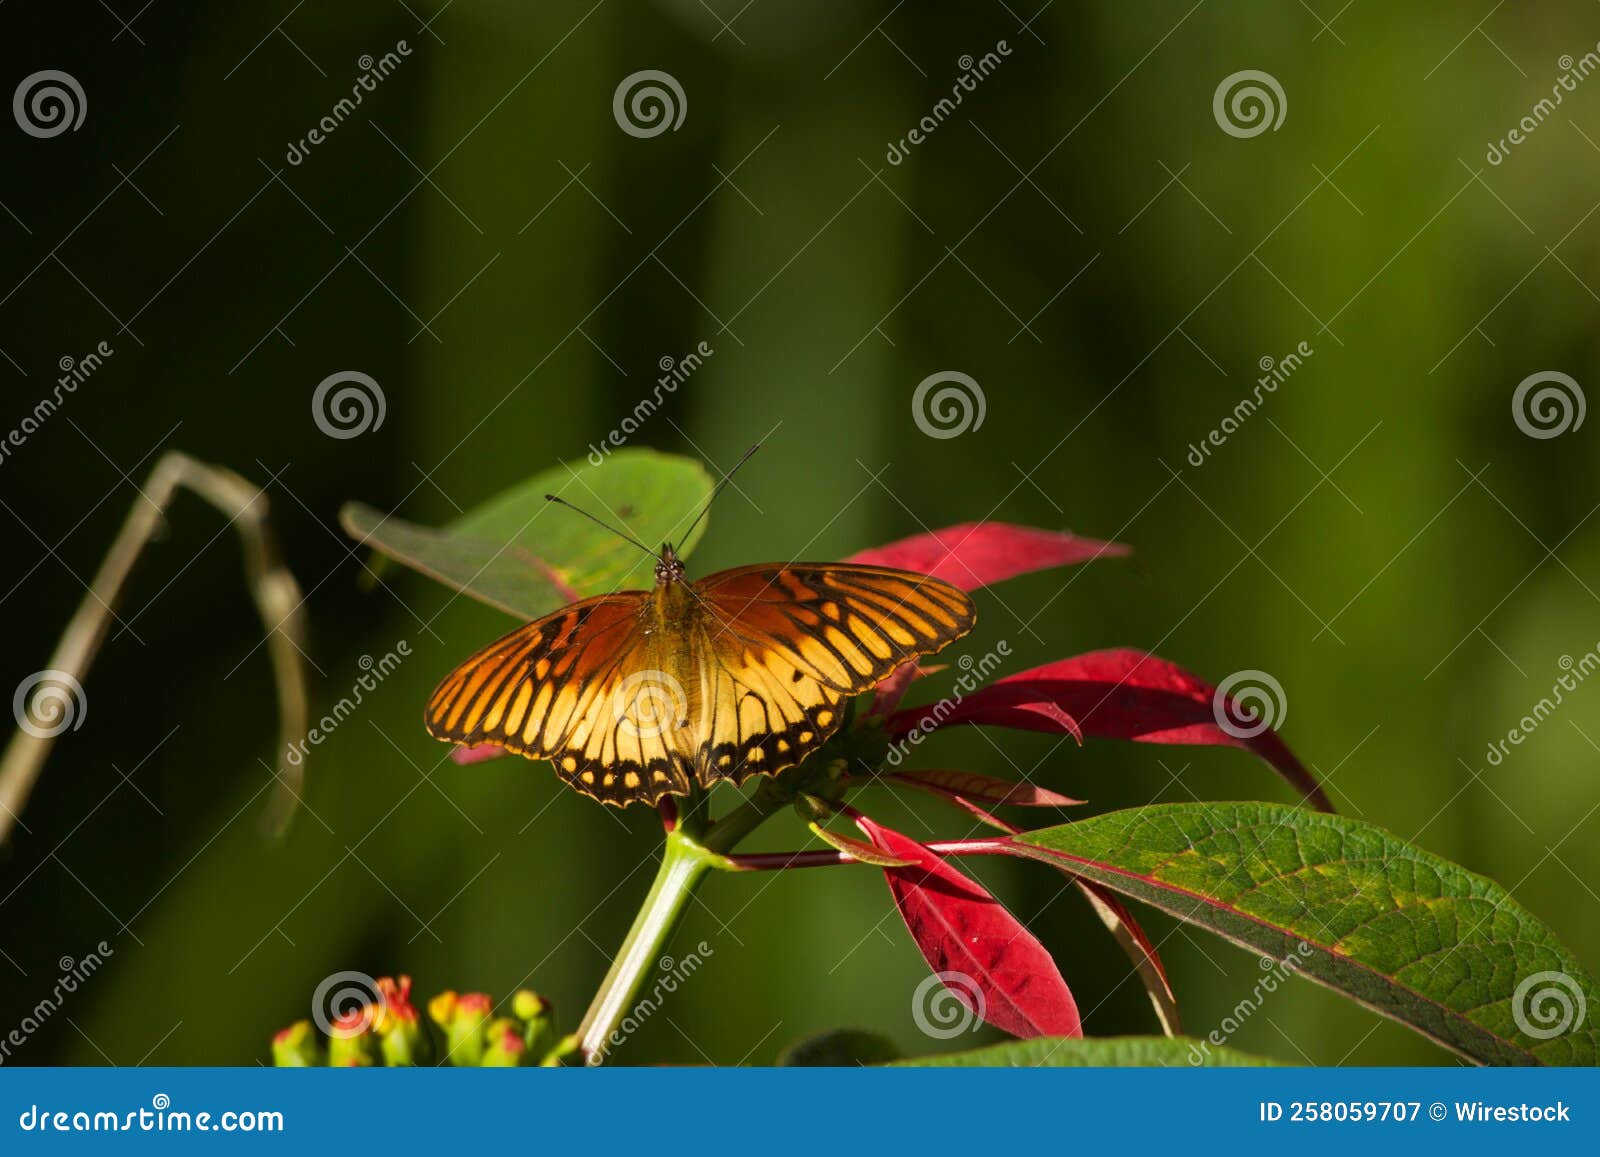 mexican silverspot (dione moneta) resting on a flower on a blurred background